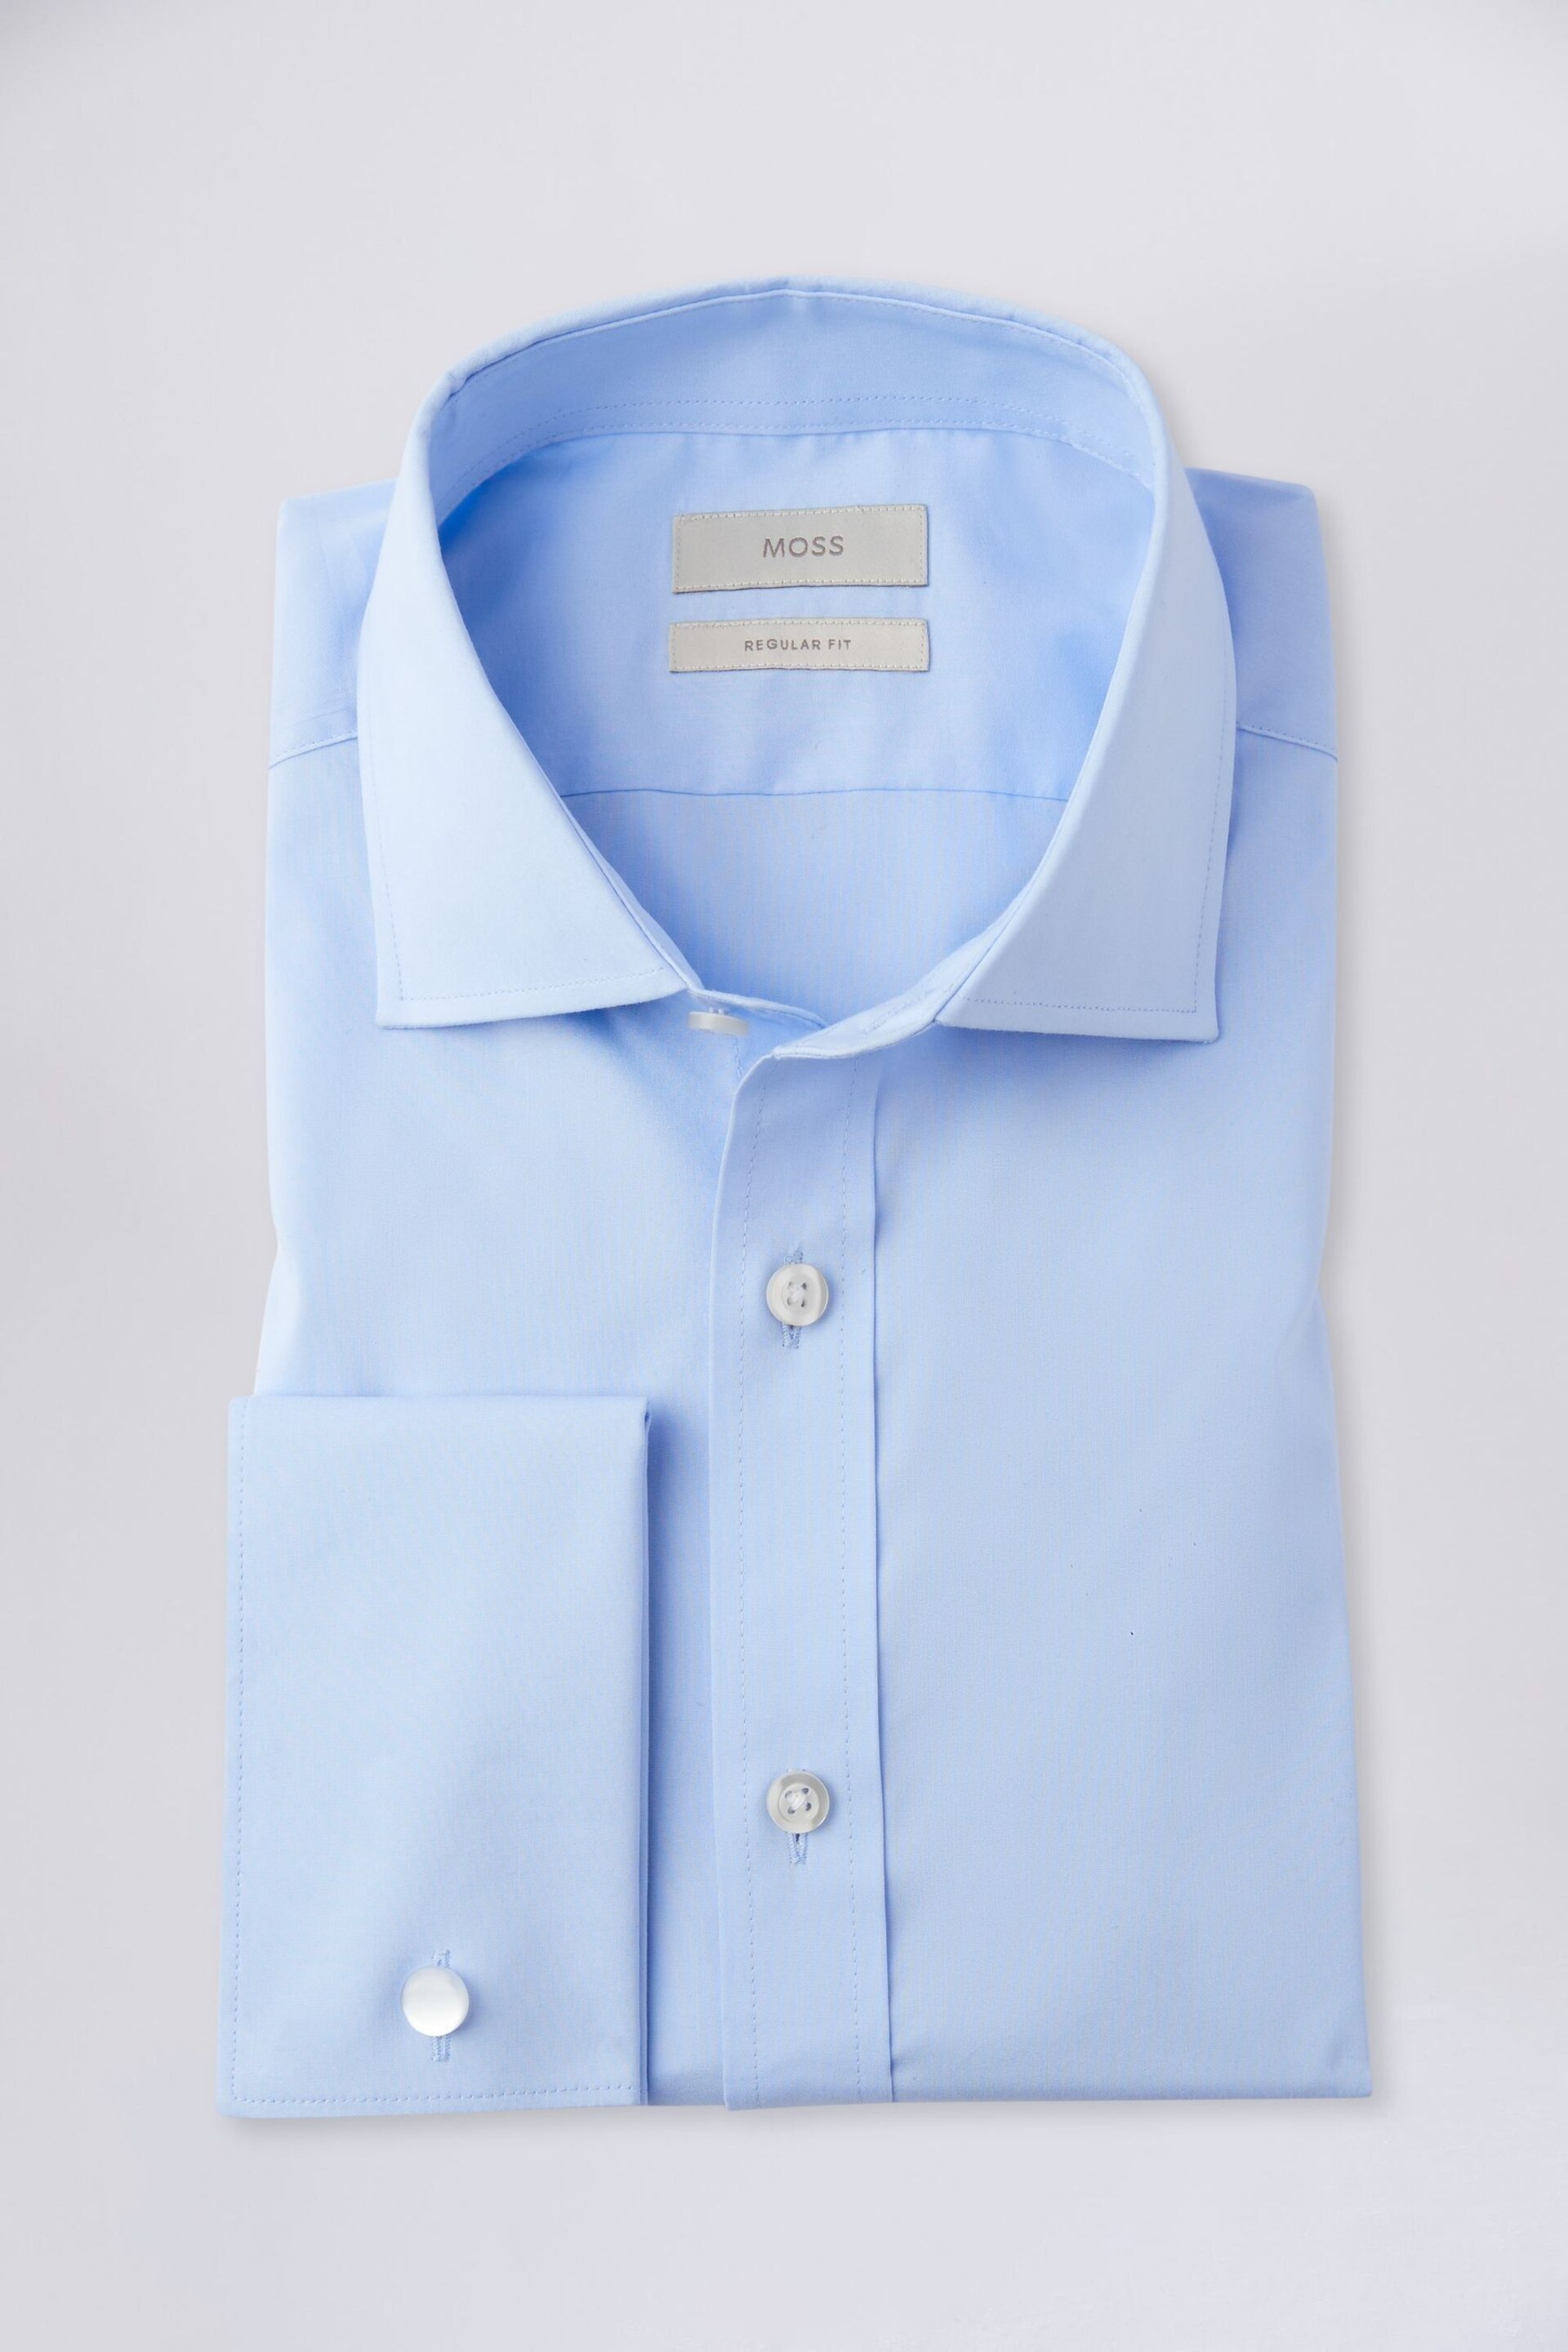 MOSS Blue Double Cuff Stretch Shirt - Image 4 of 4